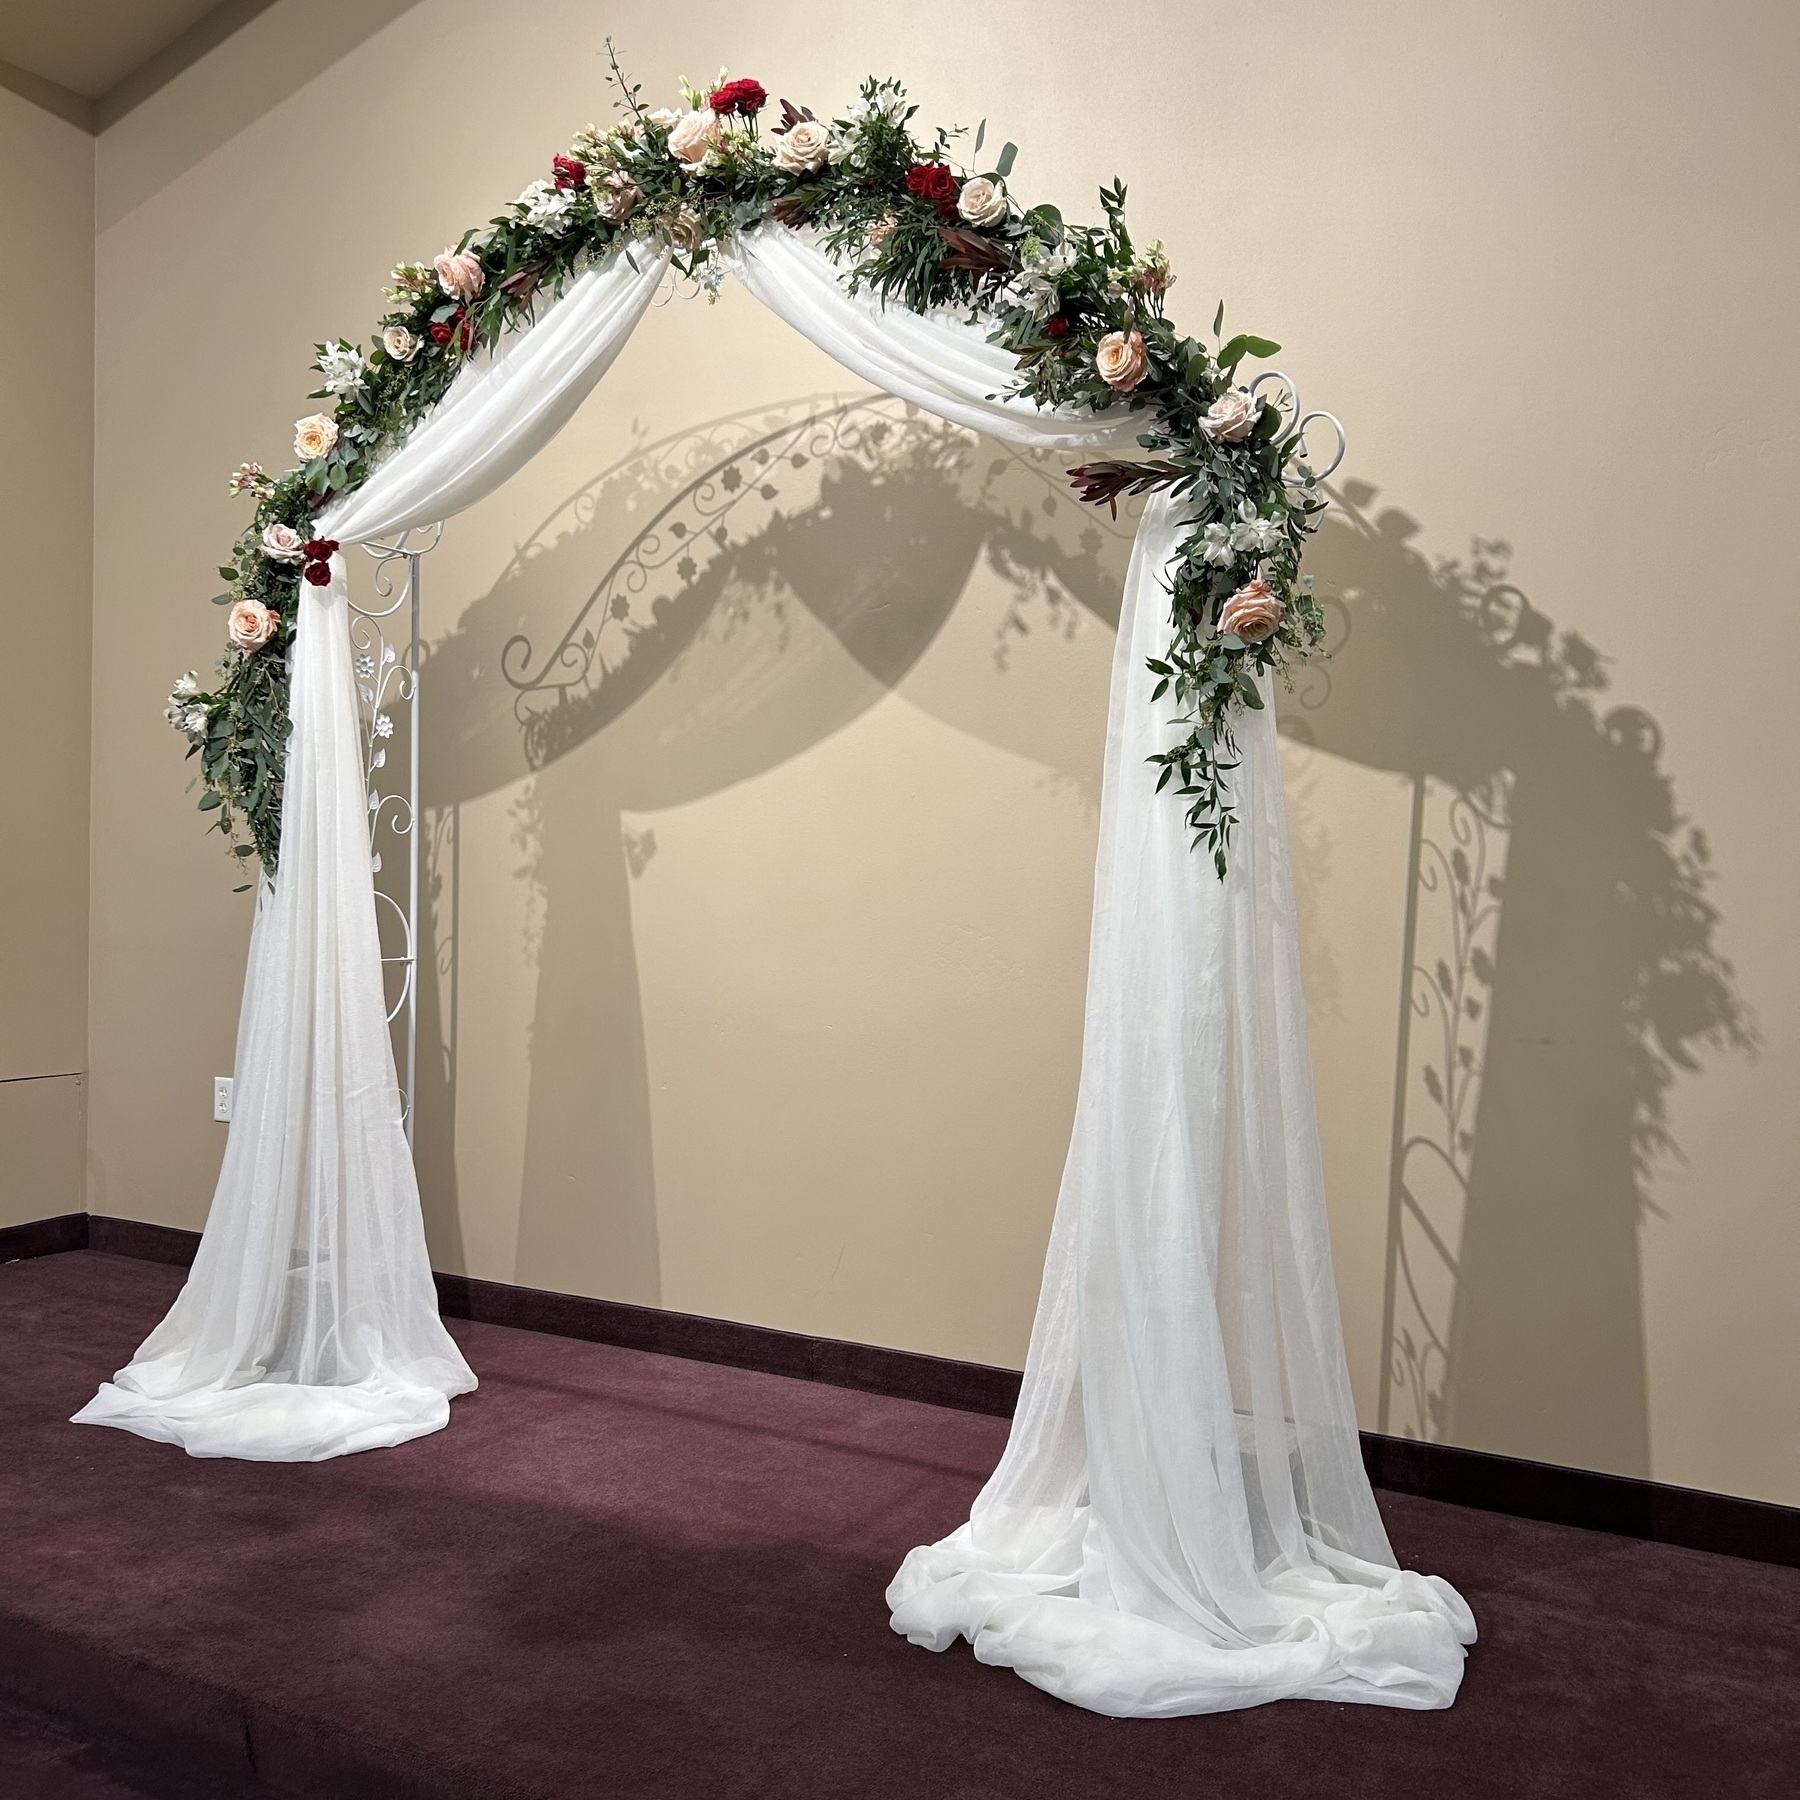 Flowers and fabric arch for a couple on their wedding day